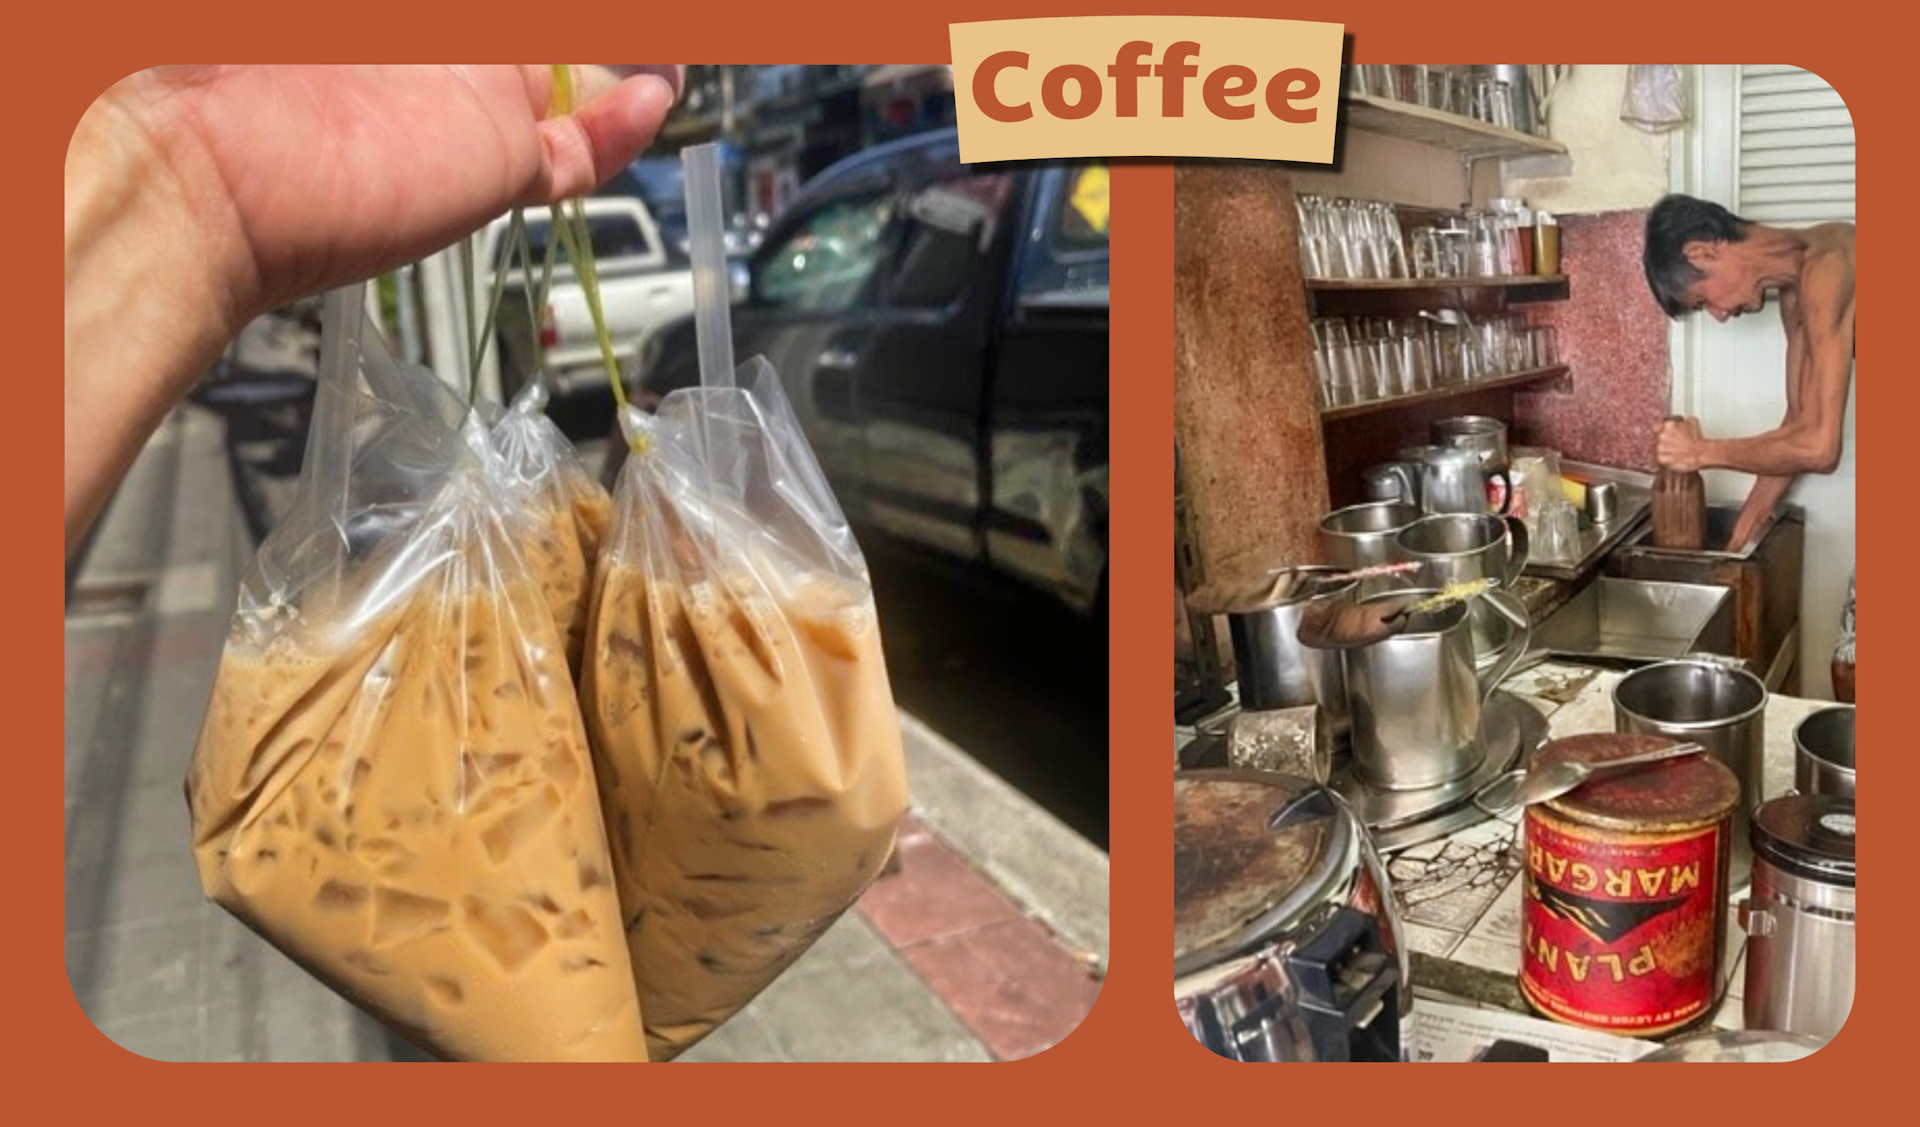 Left: a woman holding a plastic bag of coffee. Right: an elderly man making coffee in a rustic Thai coffee shop